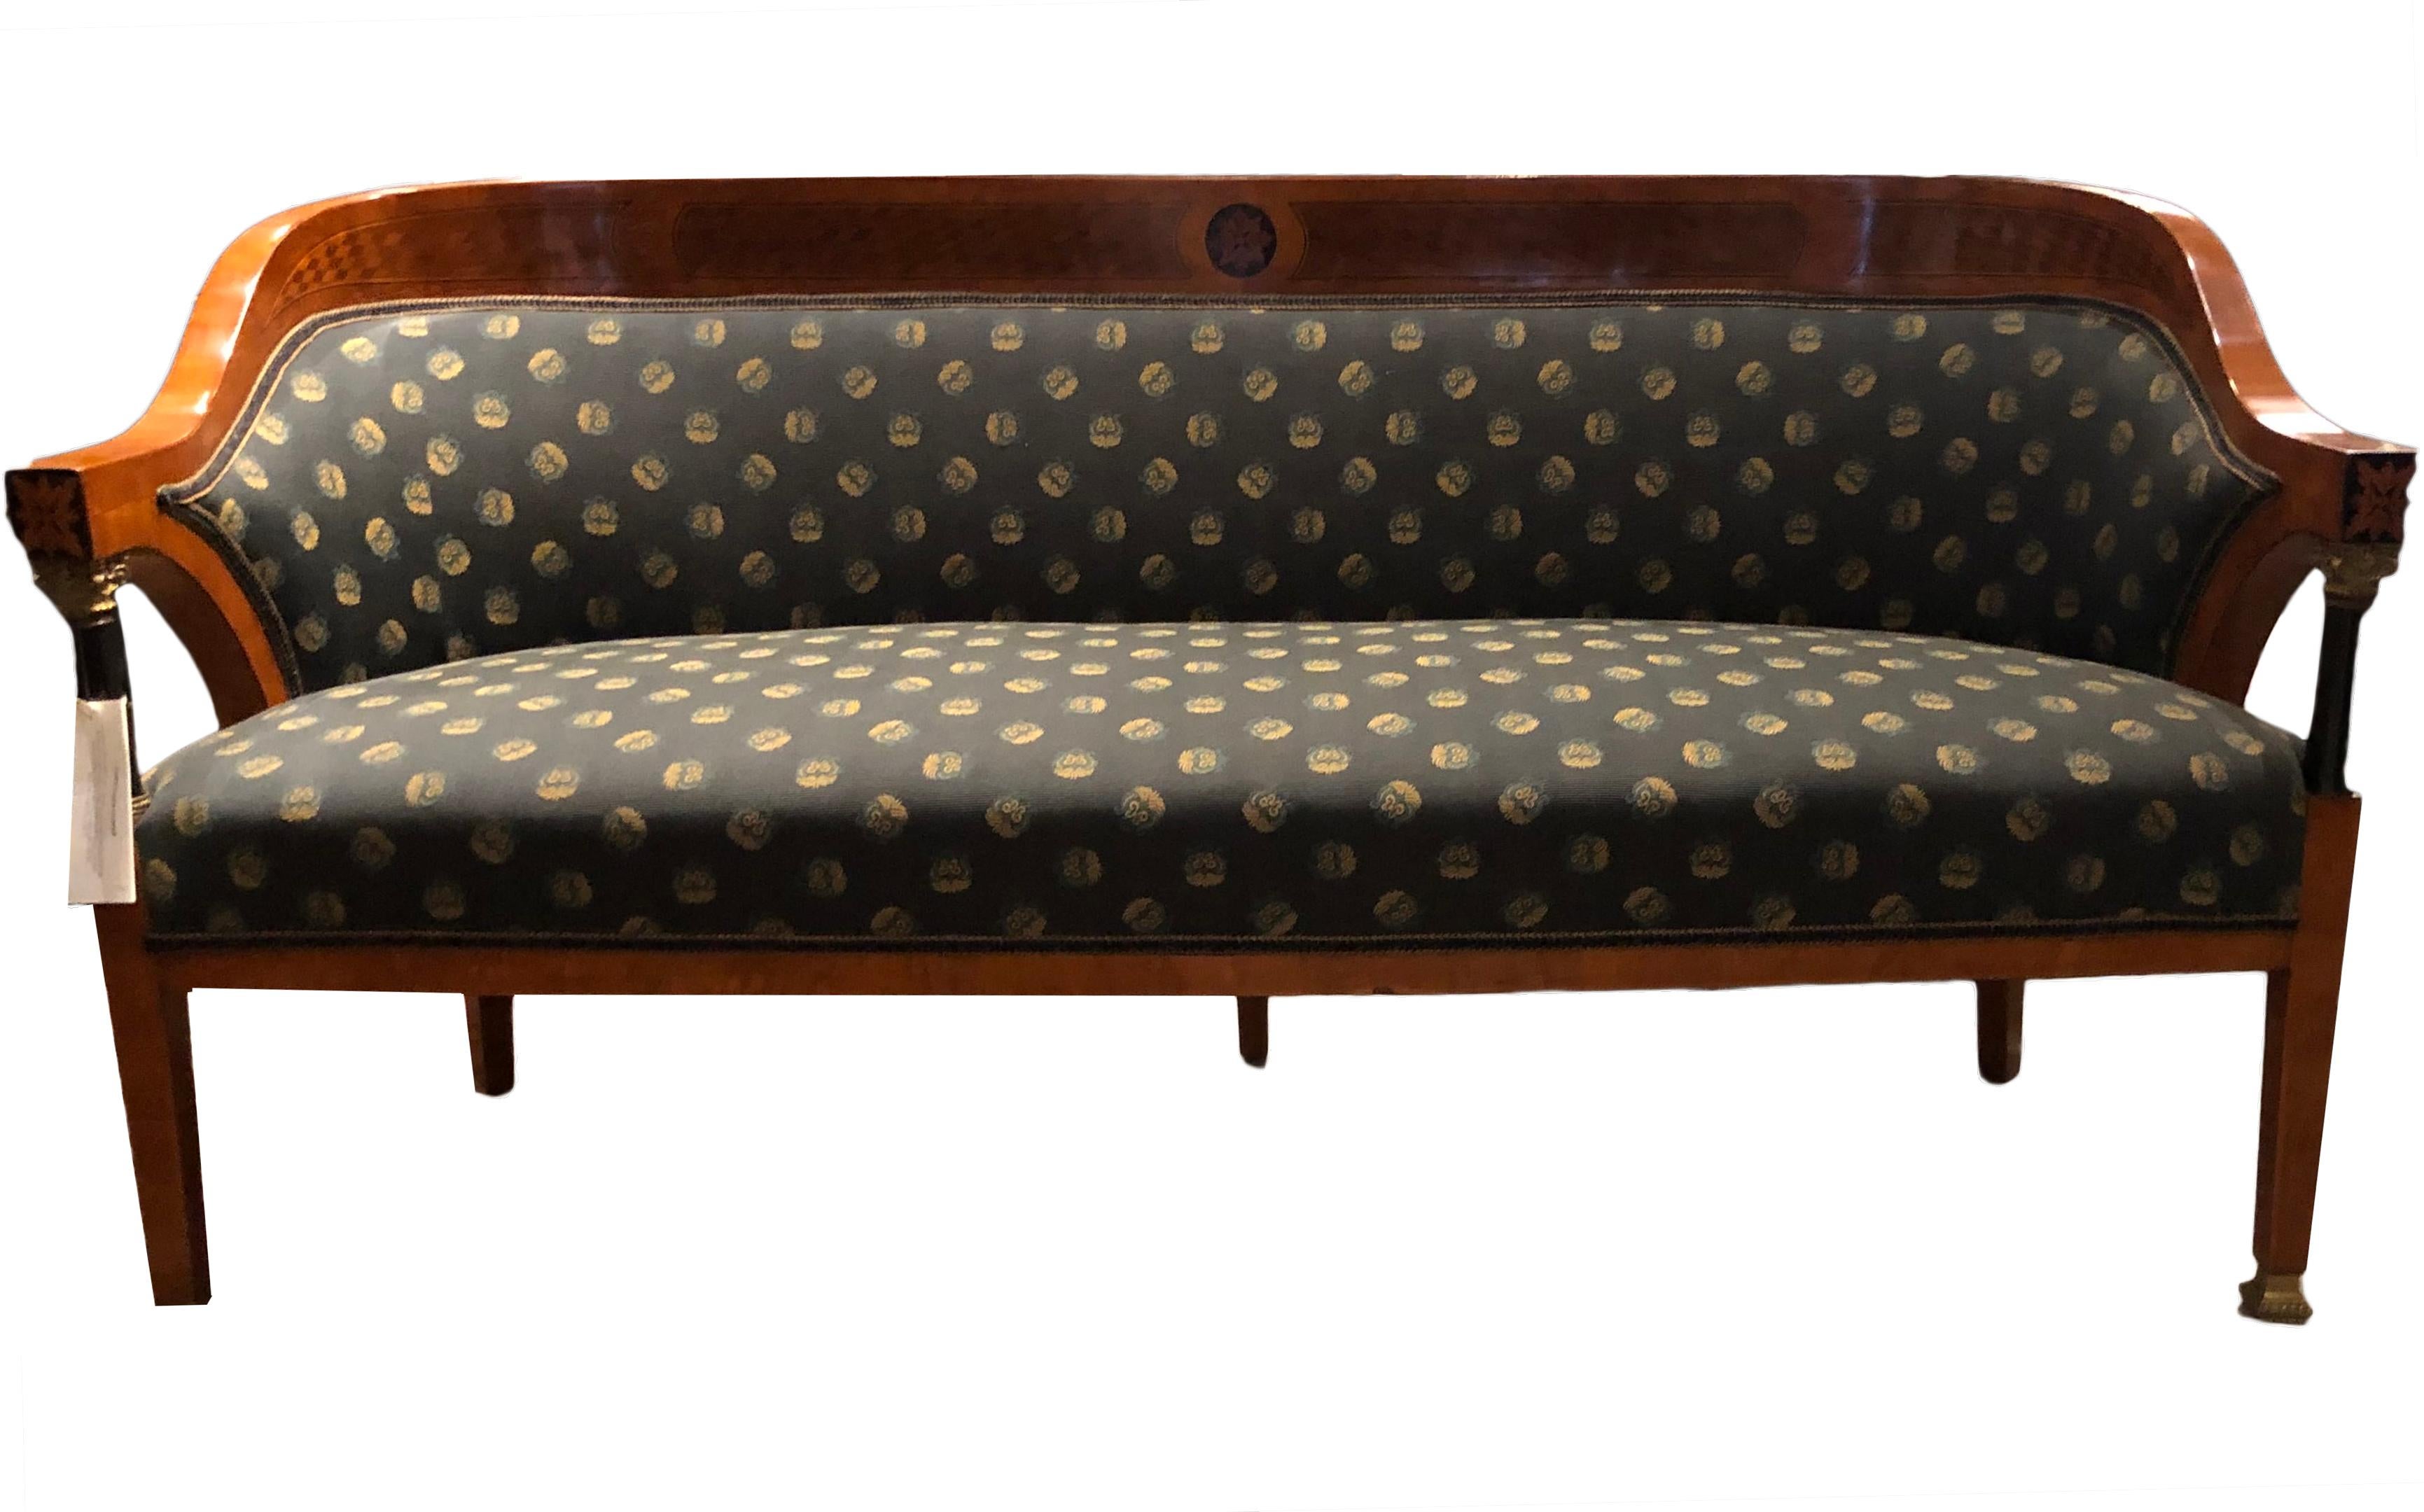 20th Century Empire Revival Loveseat  by Miklos YBL For Sale